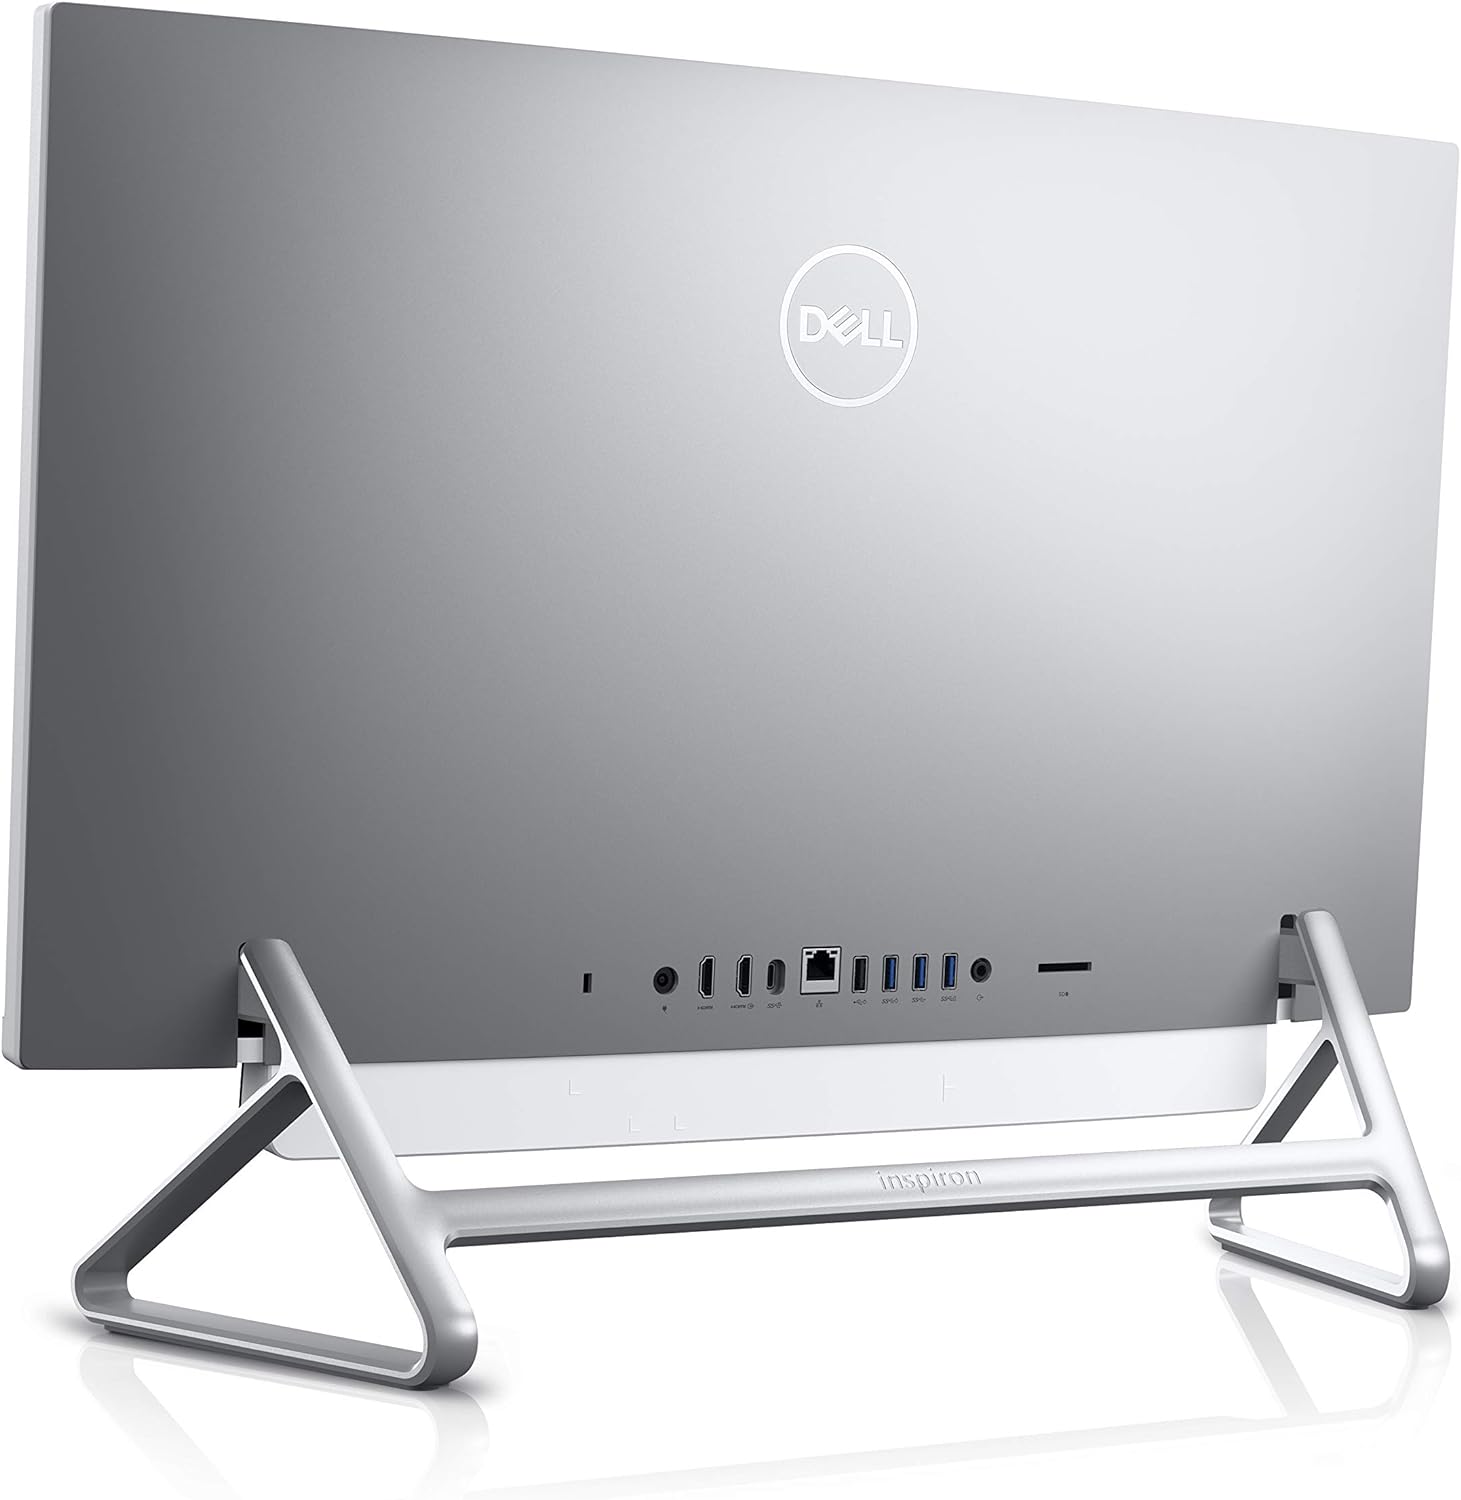 Dell Inspiron 27 7700 All in One PC 1TB + 512GB - Silver - Excellent